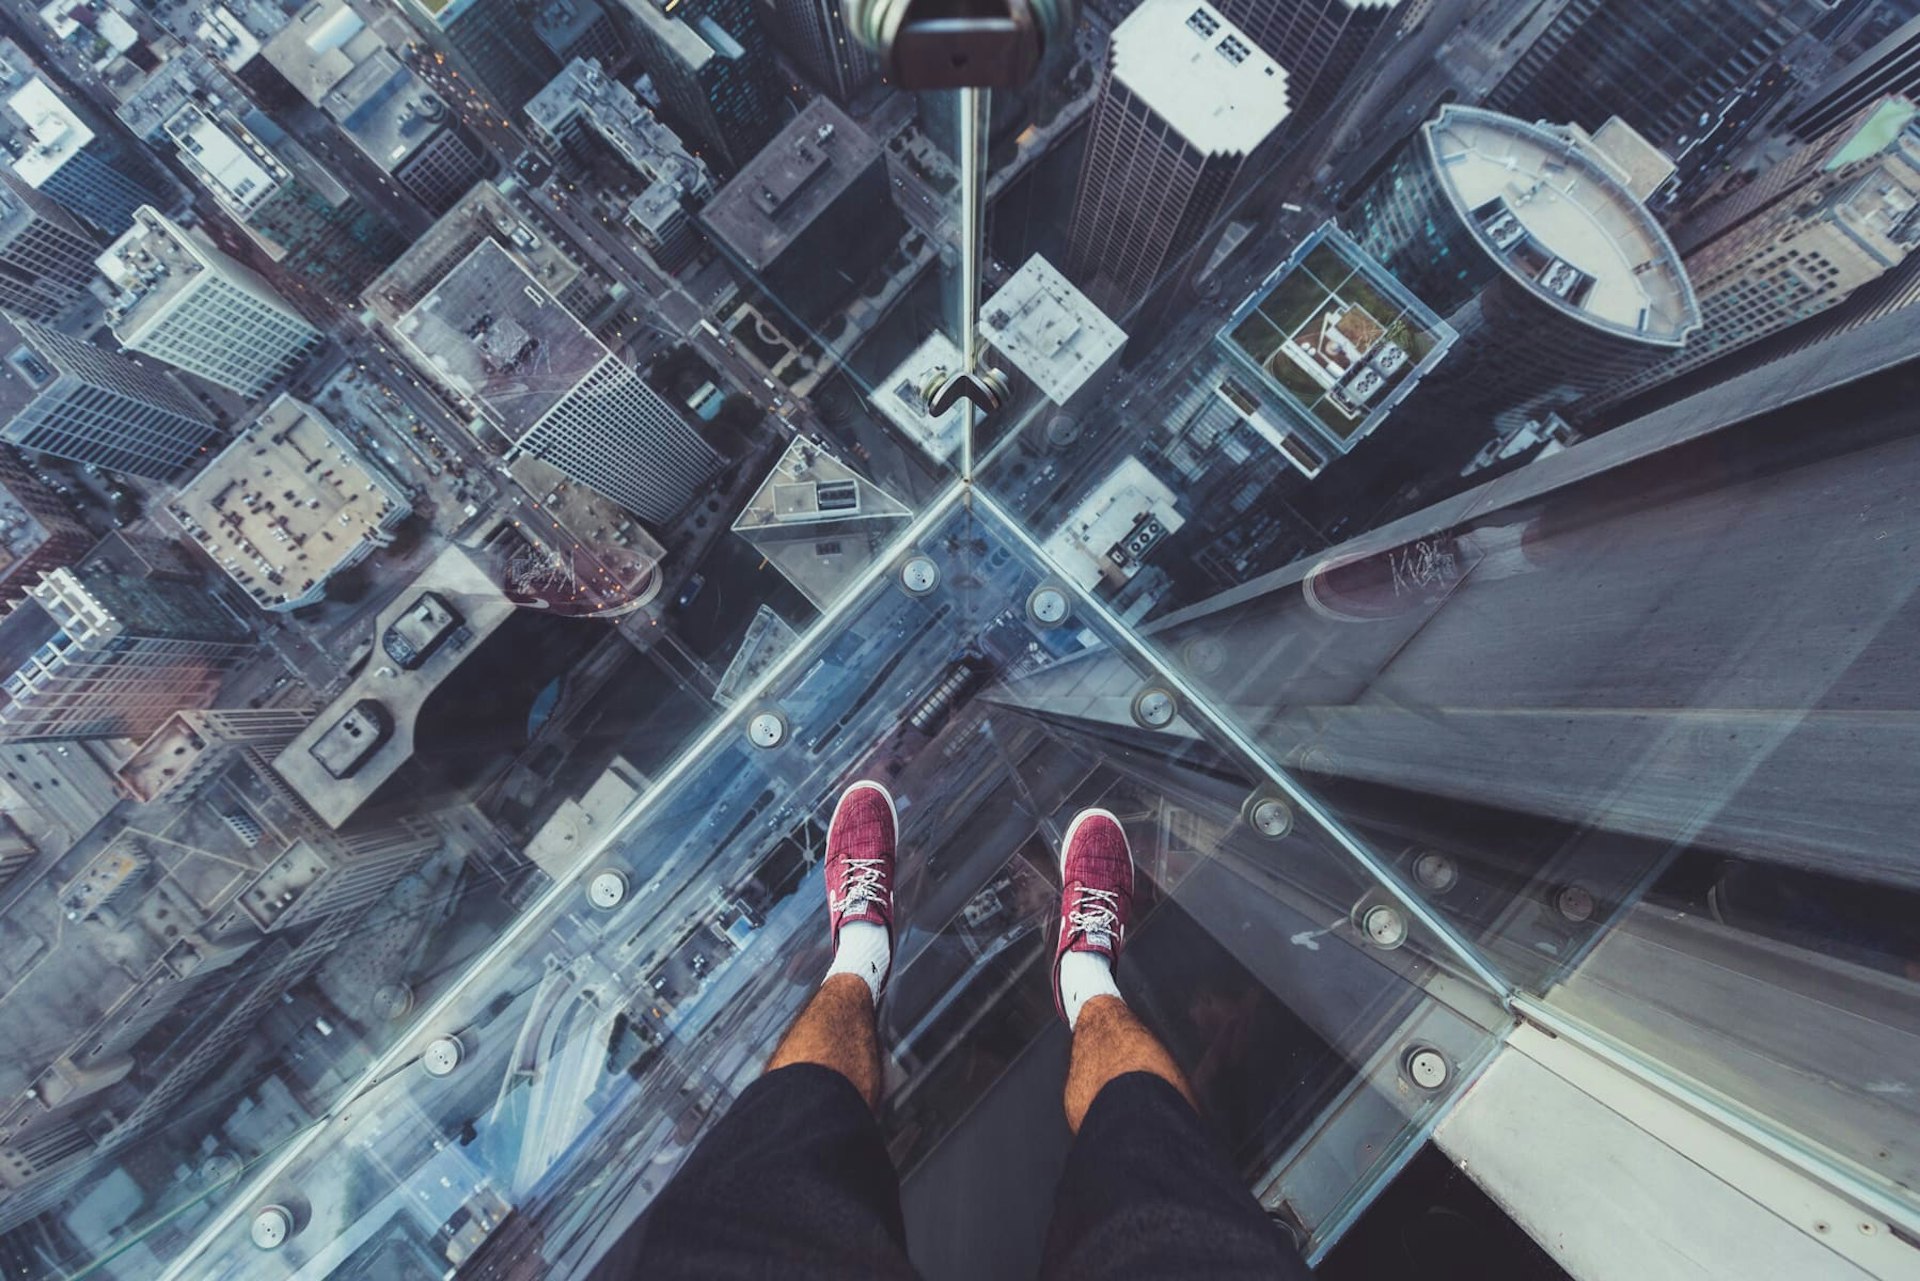 Looking down from SkyDeck of Willis Tower, Chicago